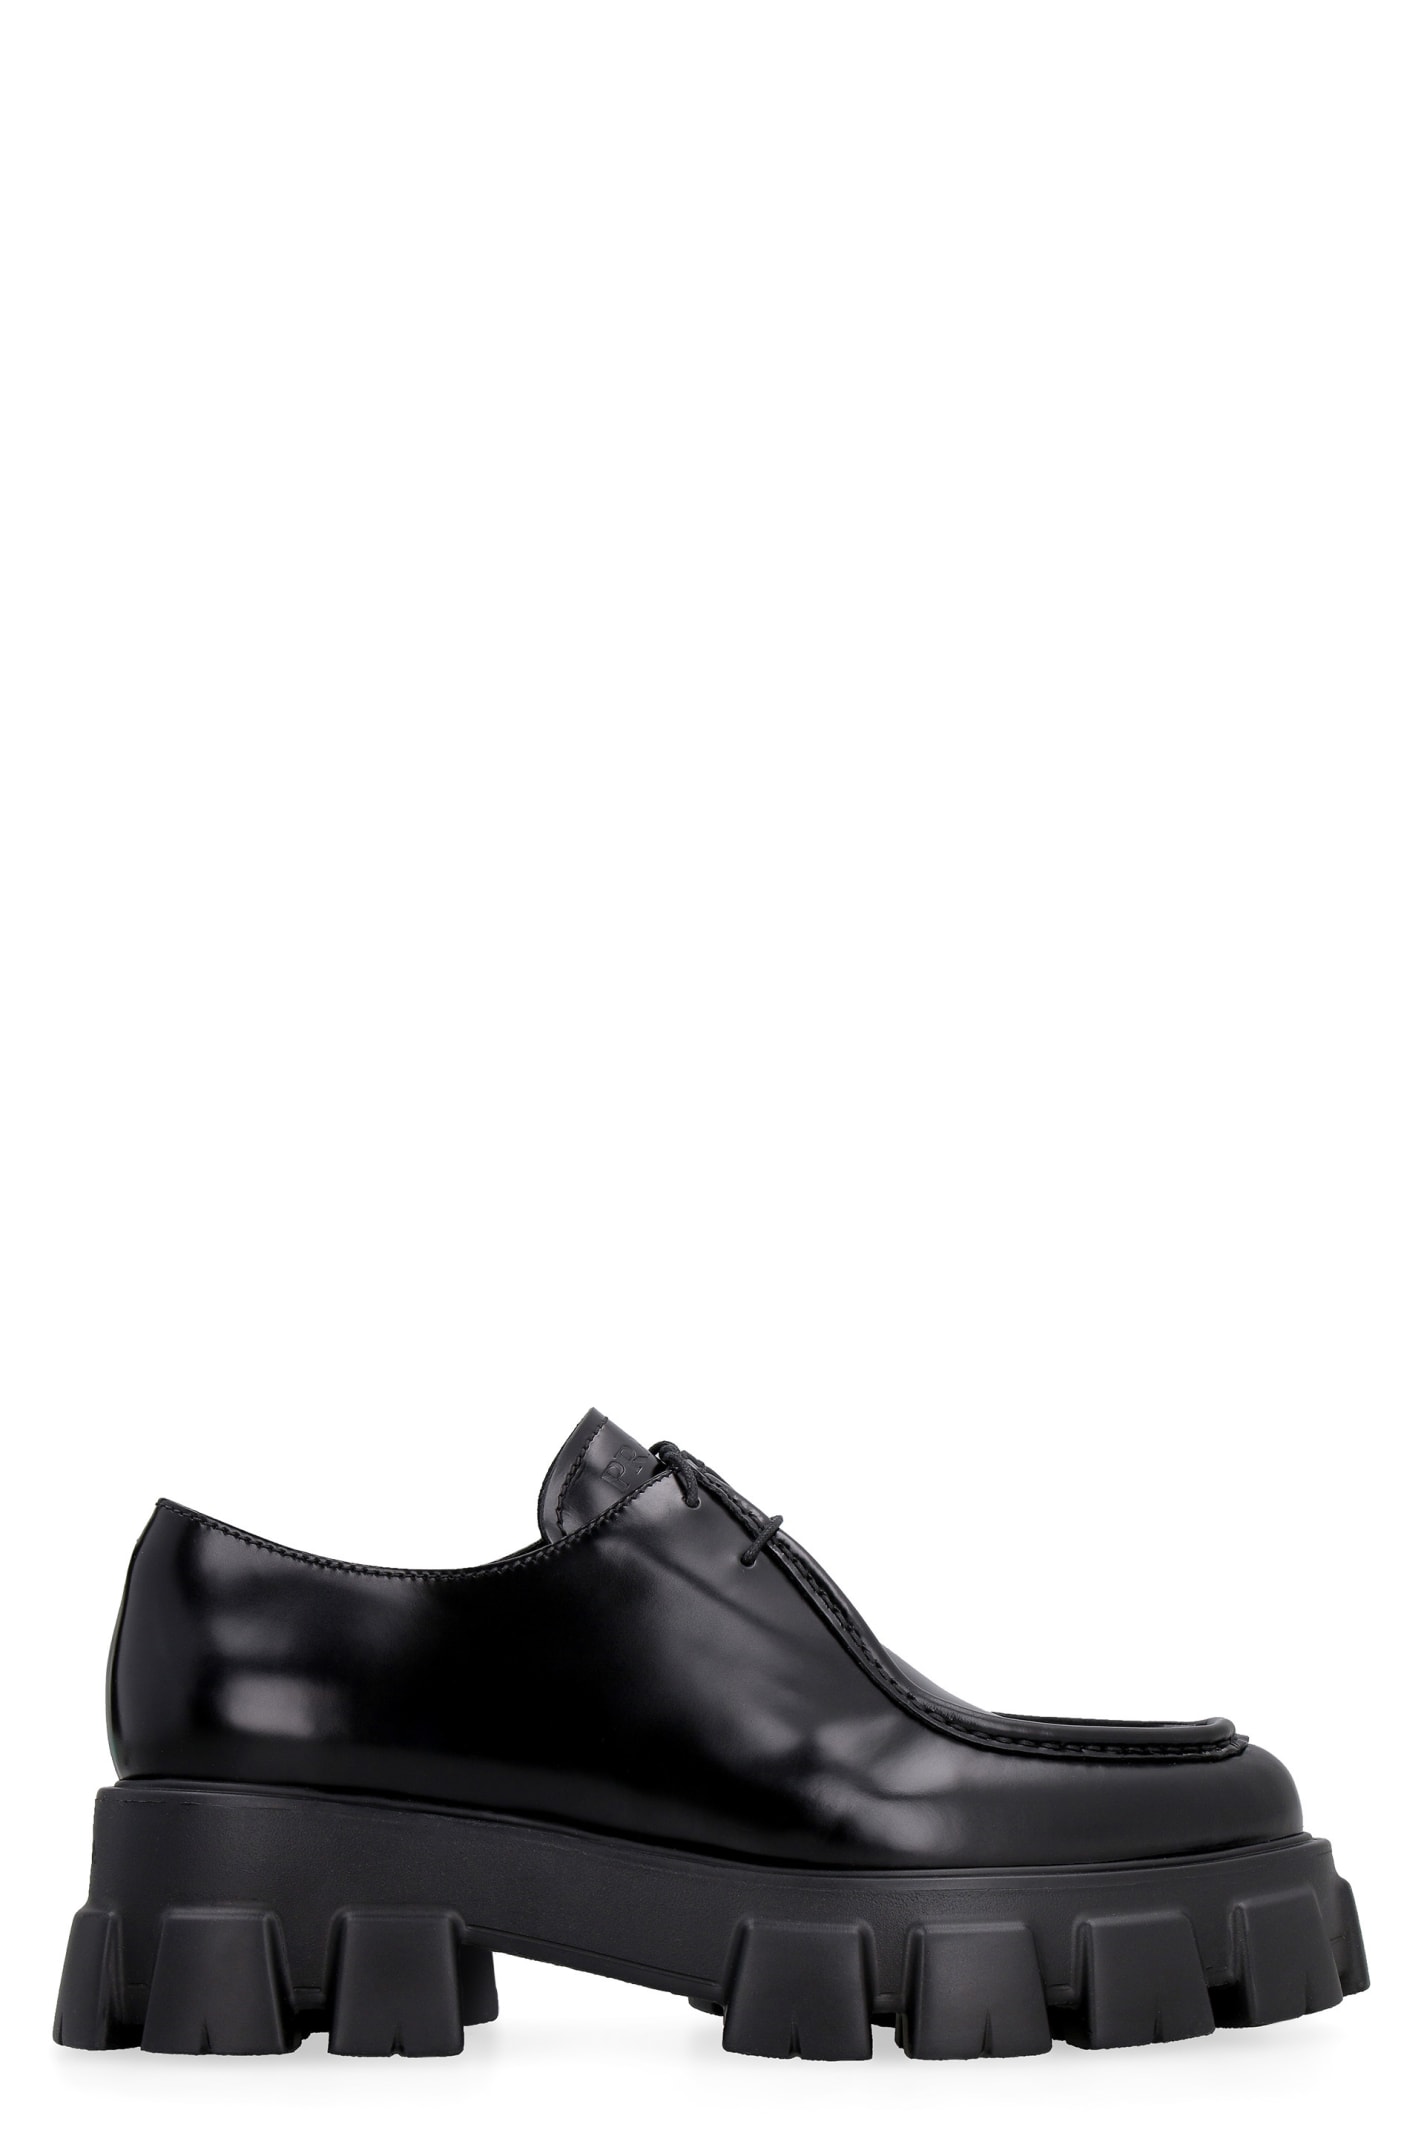 Prada Leather Lace-up Shoes